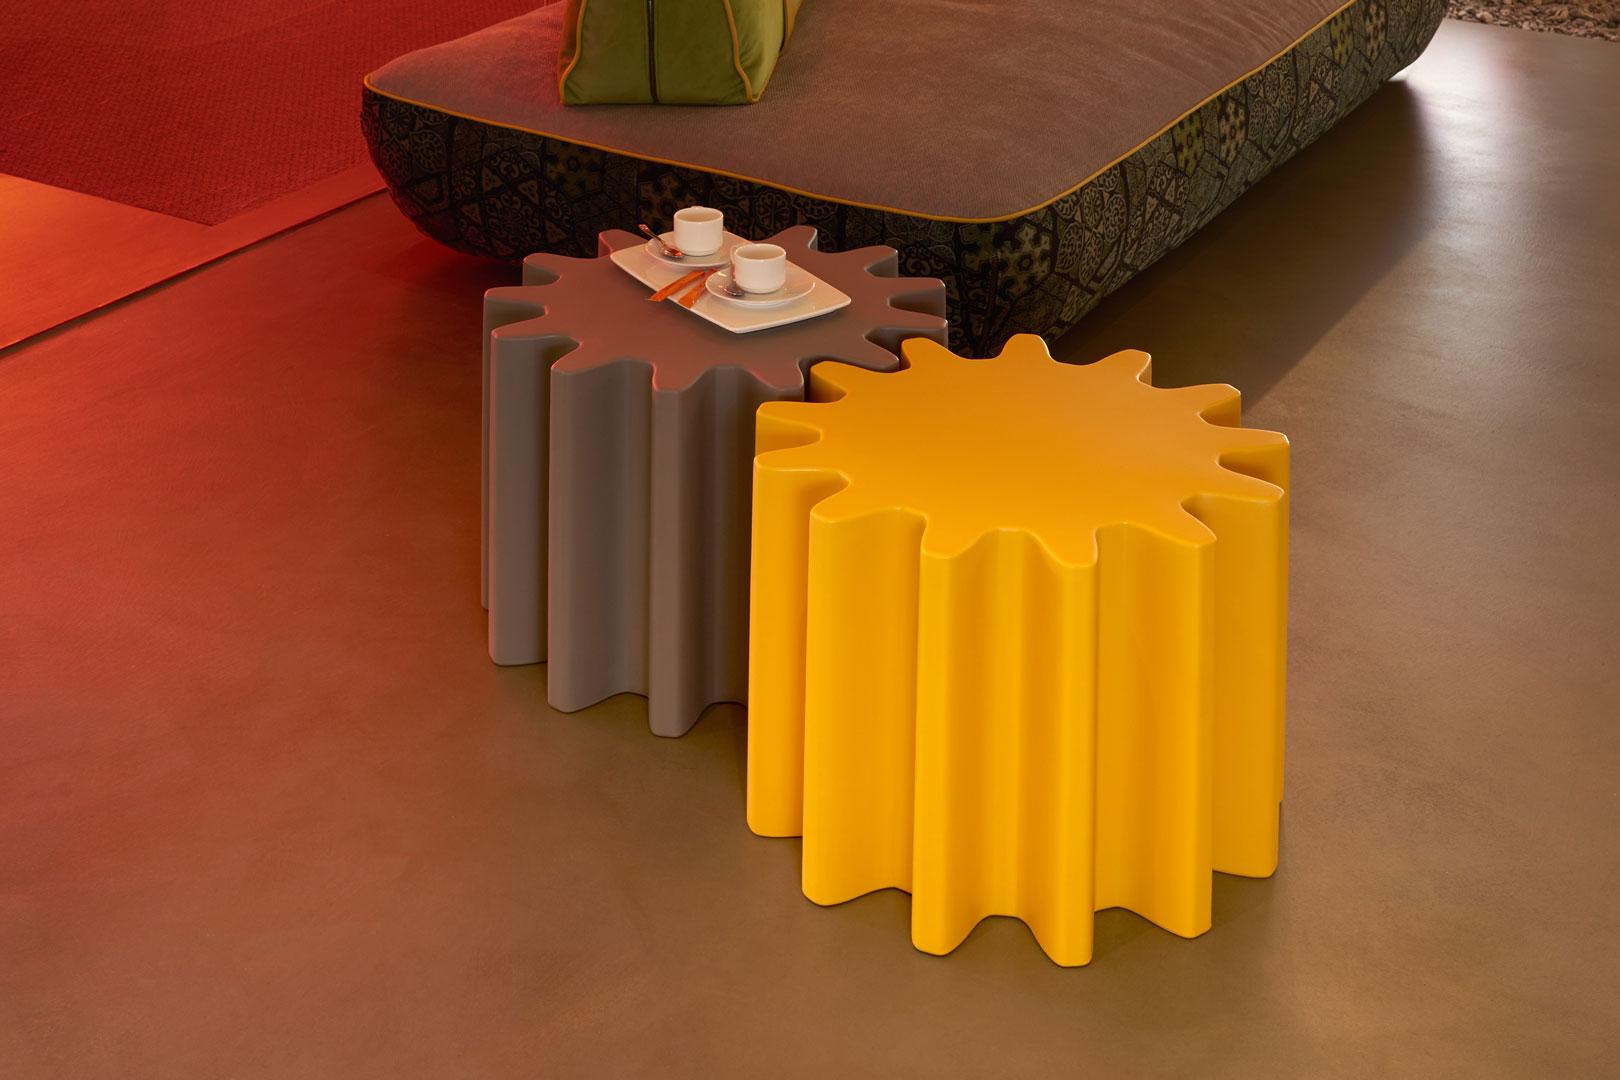 Pumpkin Orange Gear Stool by Anastasia Ivanyuk
Dimensions: D 55 x W 55 x H 43 cm. Seat Height: 43 cm.
Materials: Polyethylene.
Weight: 6 kg.

Available in different color options. This product is suitable for indoor and outdoor use. Available in